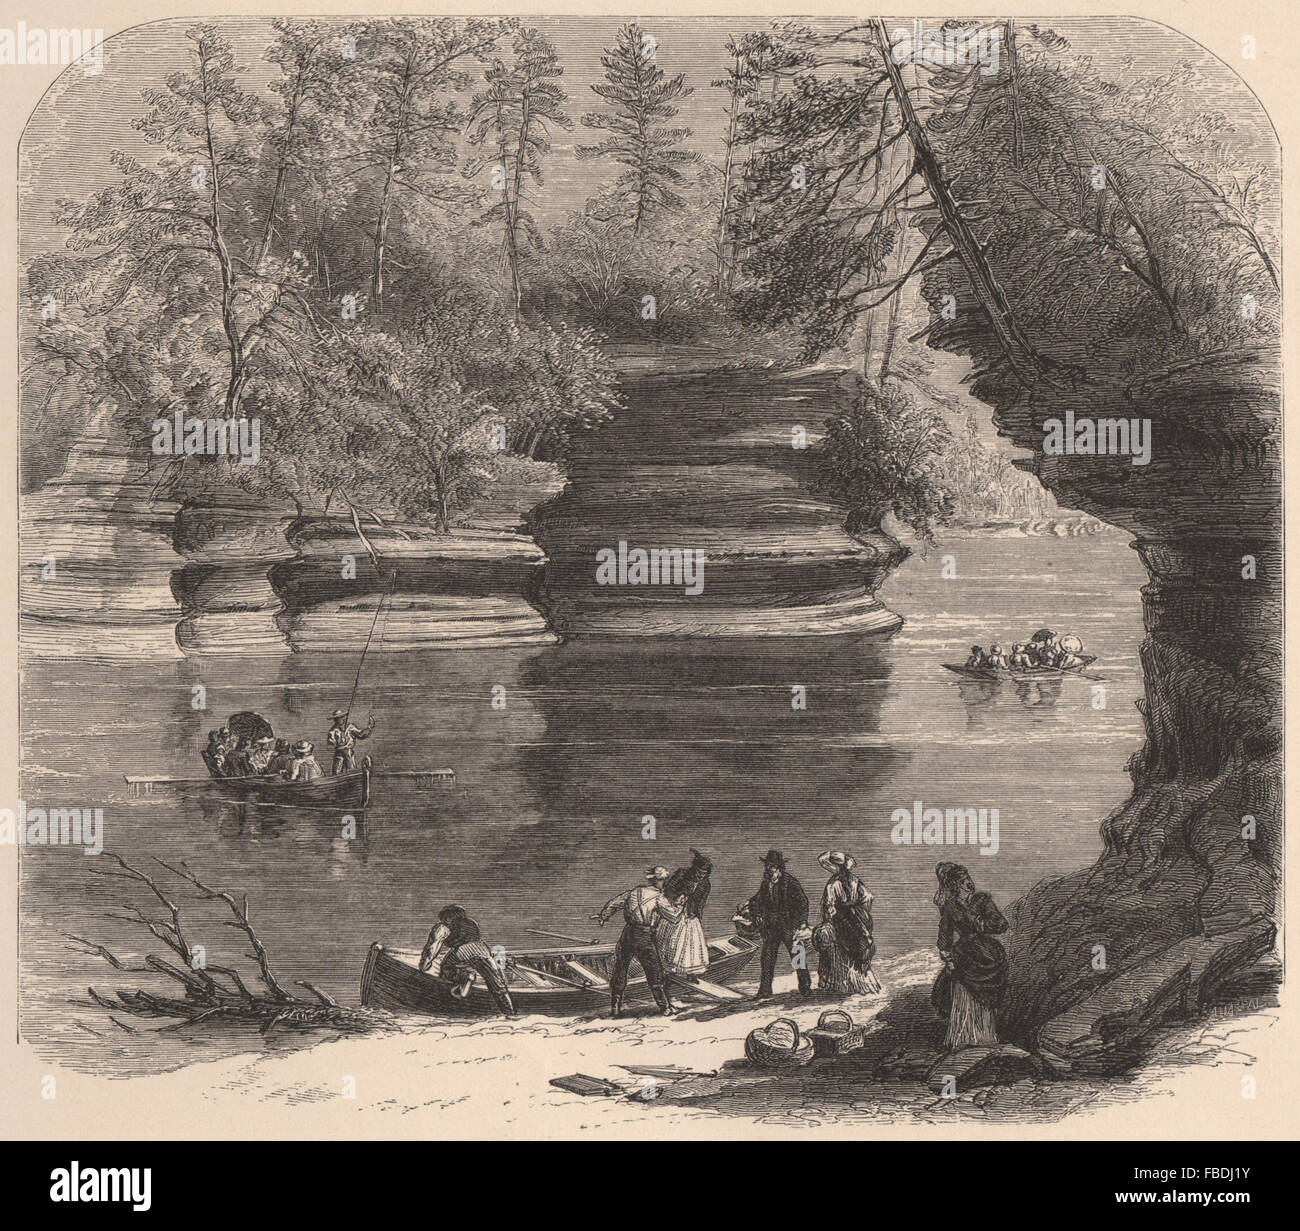 Le Wisconsin : Steamboat Rock, Wisconsin River, antique print 1874 Banque D'Images